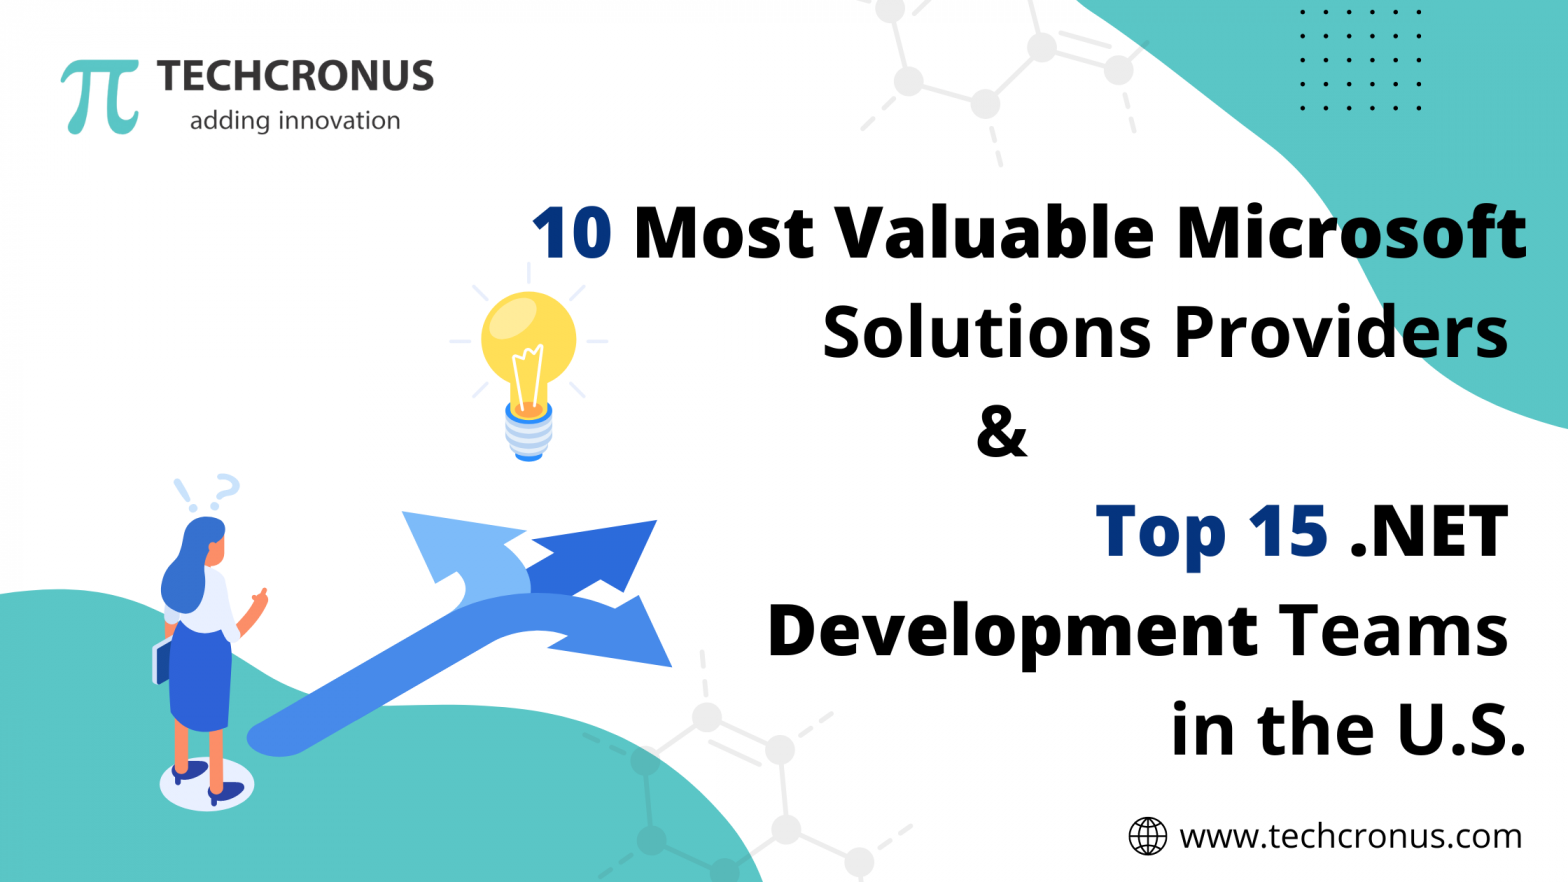 10 Most Valuable Microsoft Solutions Providers & Top 15 .NET Development Teams in the U.S.